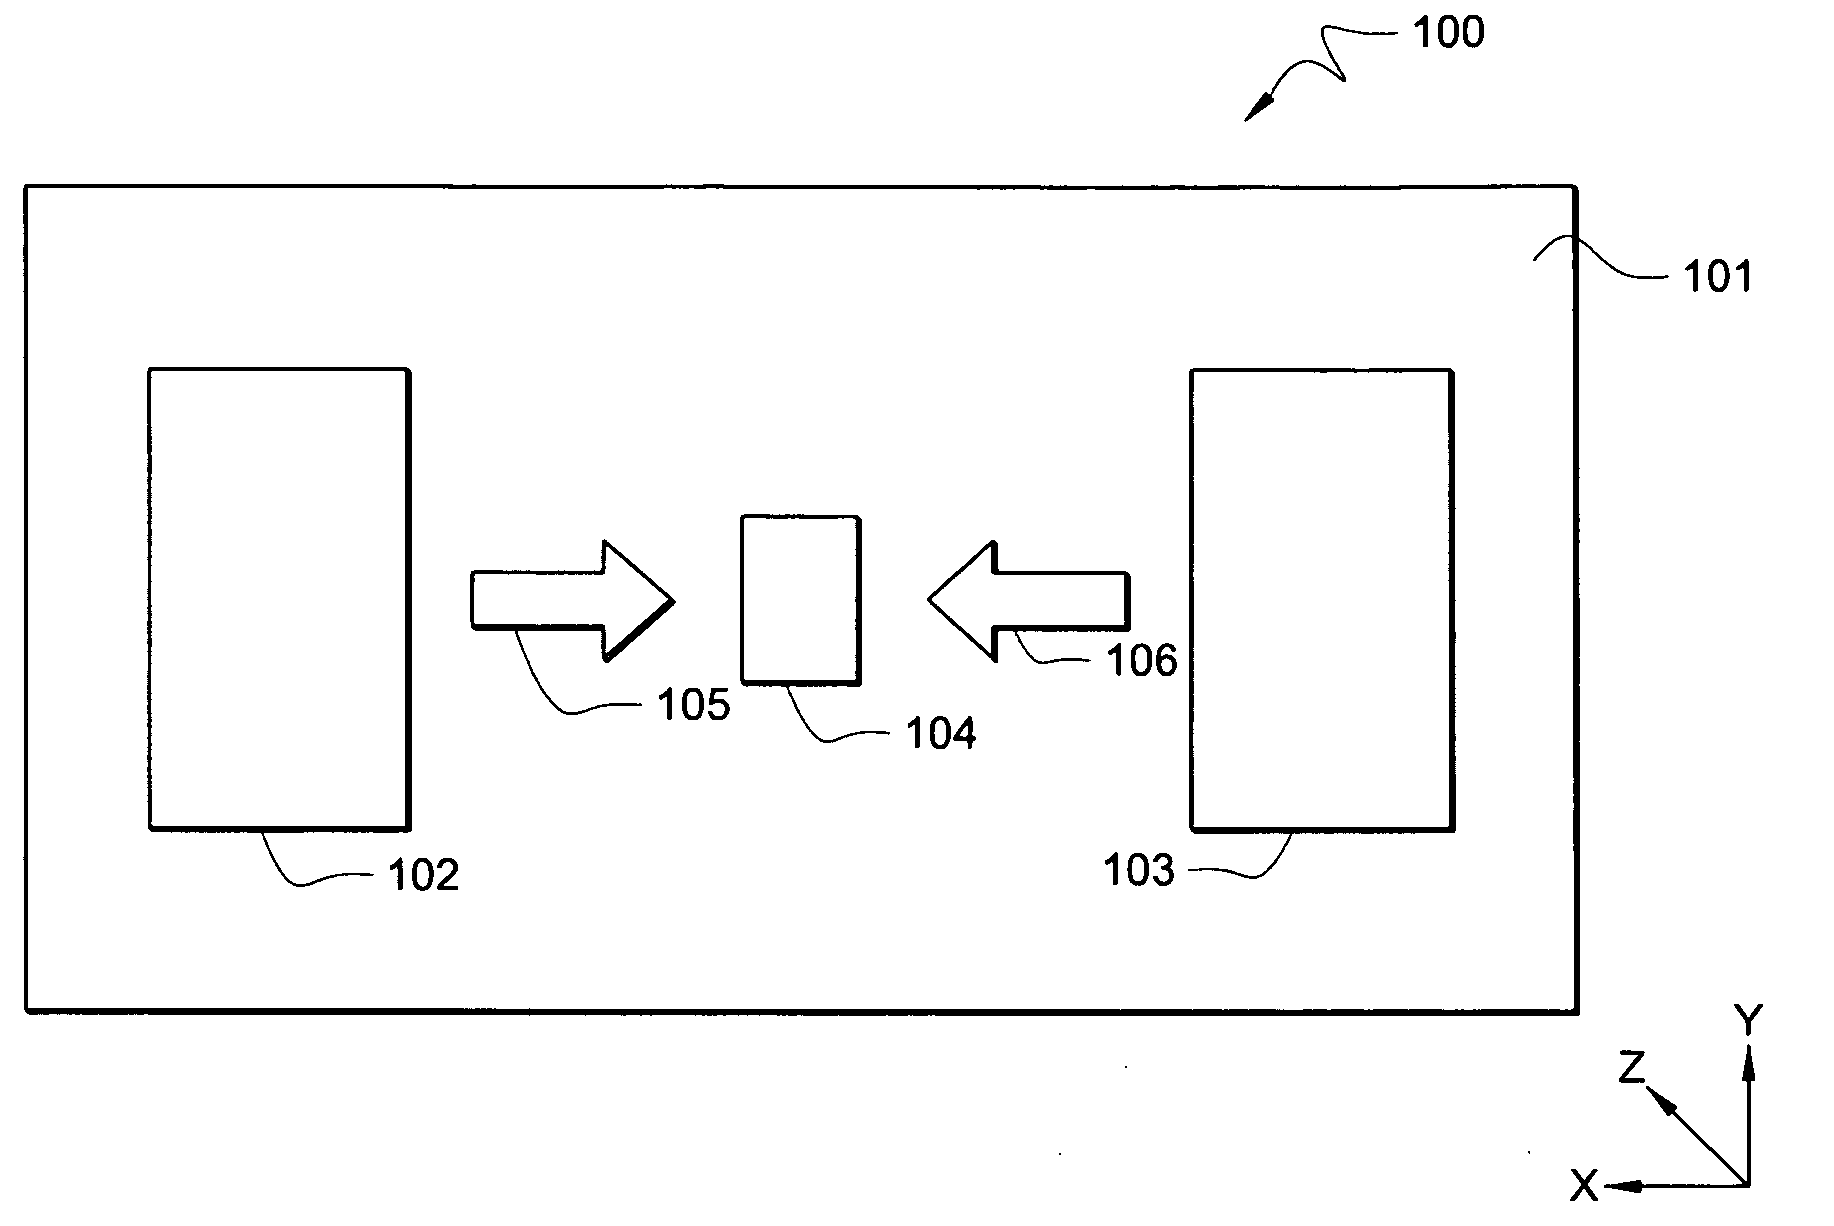 Systems and methods using ground plane filters for device isolation